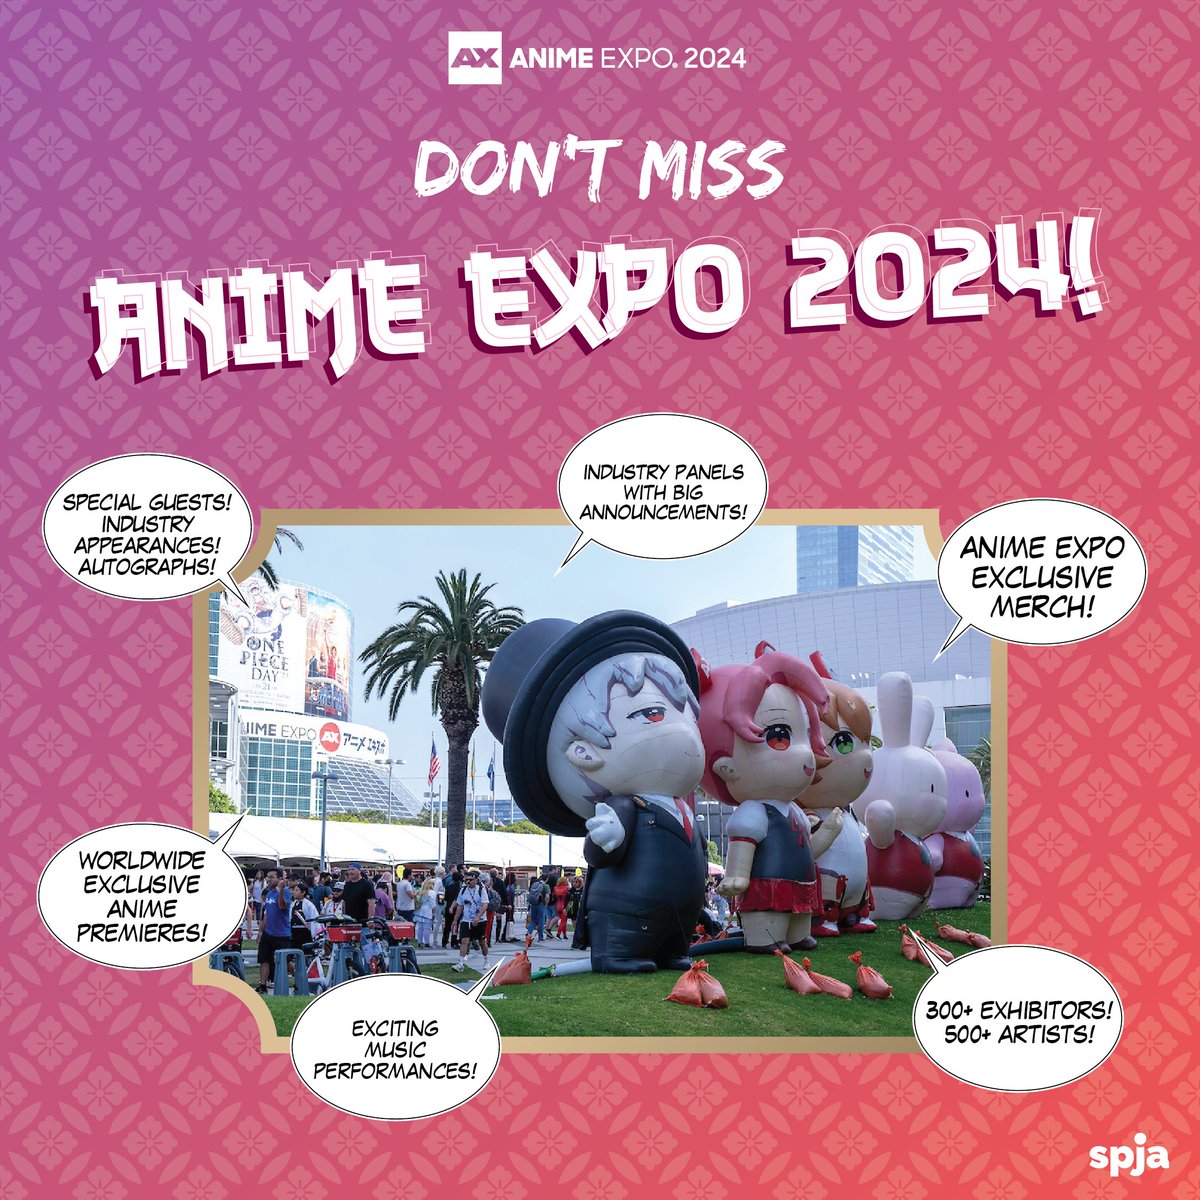 🎋 Get ready for #AX2024! 🔥 This year is going to be bigger and better than ever. Don't miss out on the epic panels, incredible guests, and unforgettable moments. 🚀 🎟️ Buy Your Badge Now! bit.ly/4bcTcYQ 🏨 Book your Hotel! bit.ly/3OgCDkG